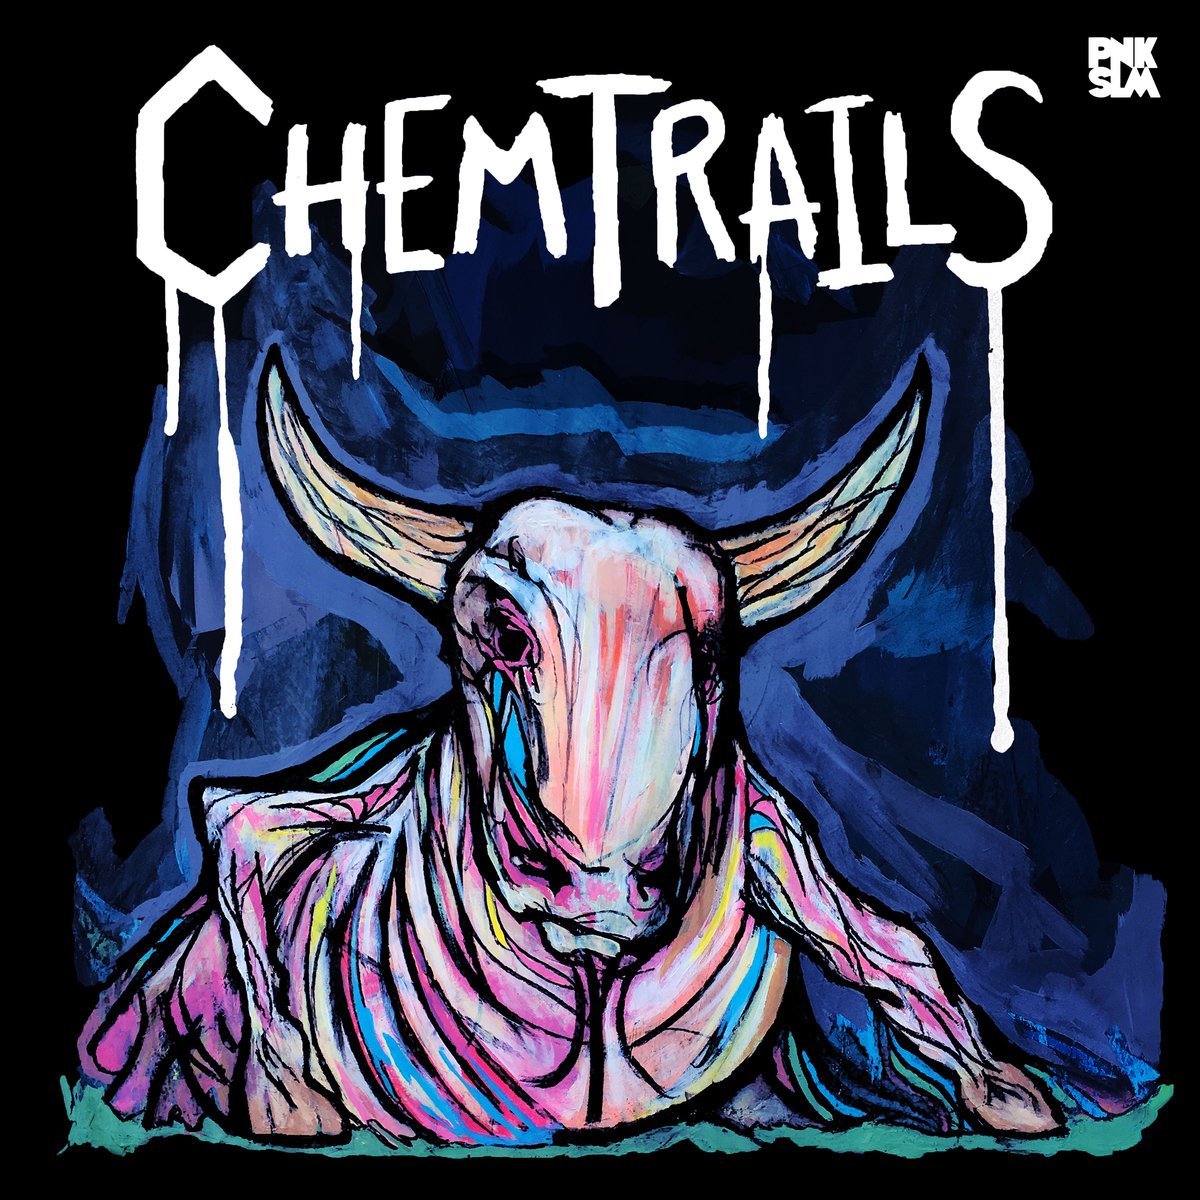 CHEMTRAILS ALBUMS OF THE MONTH